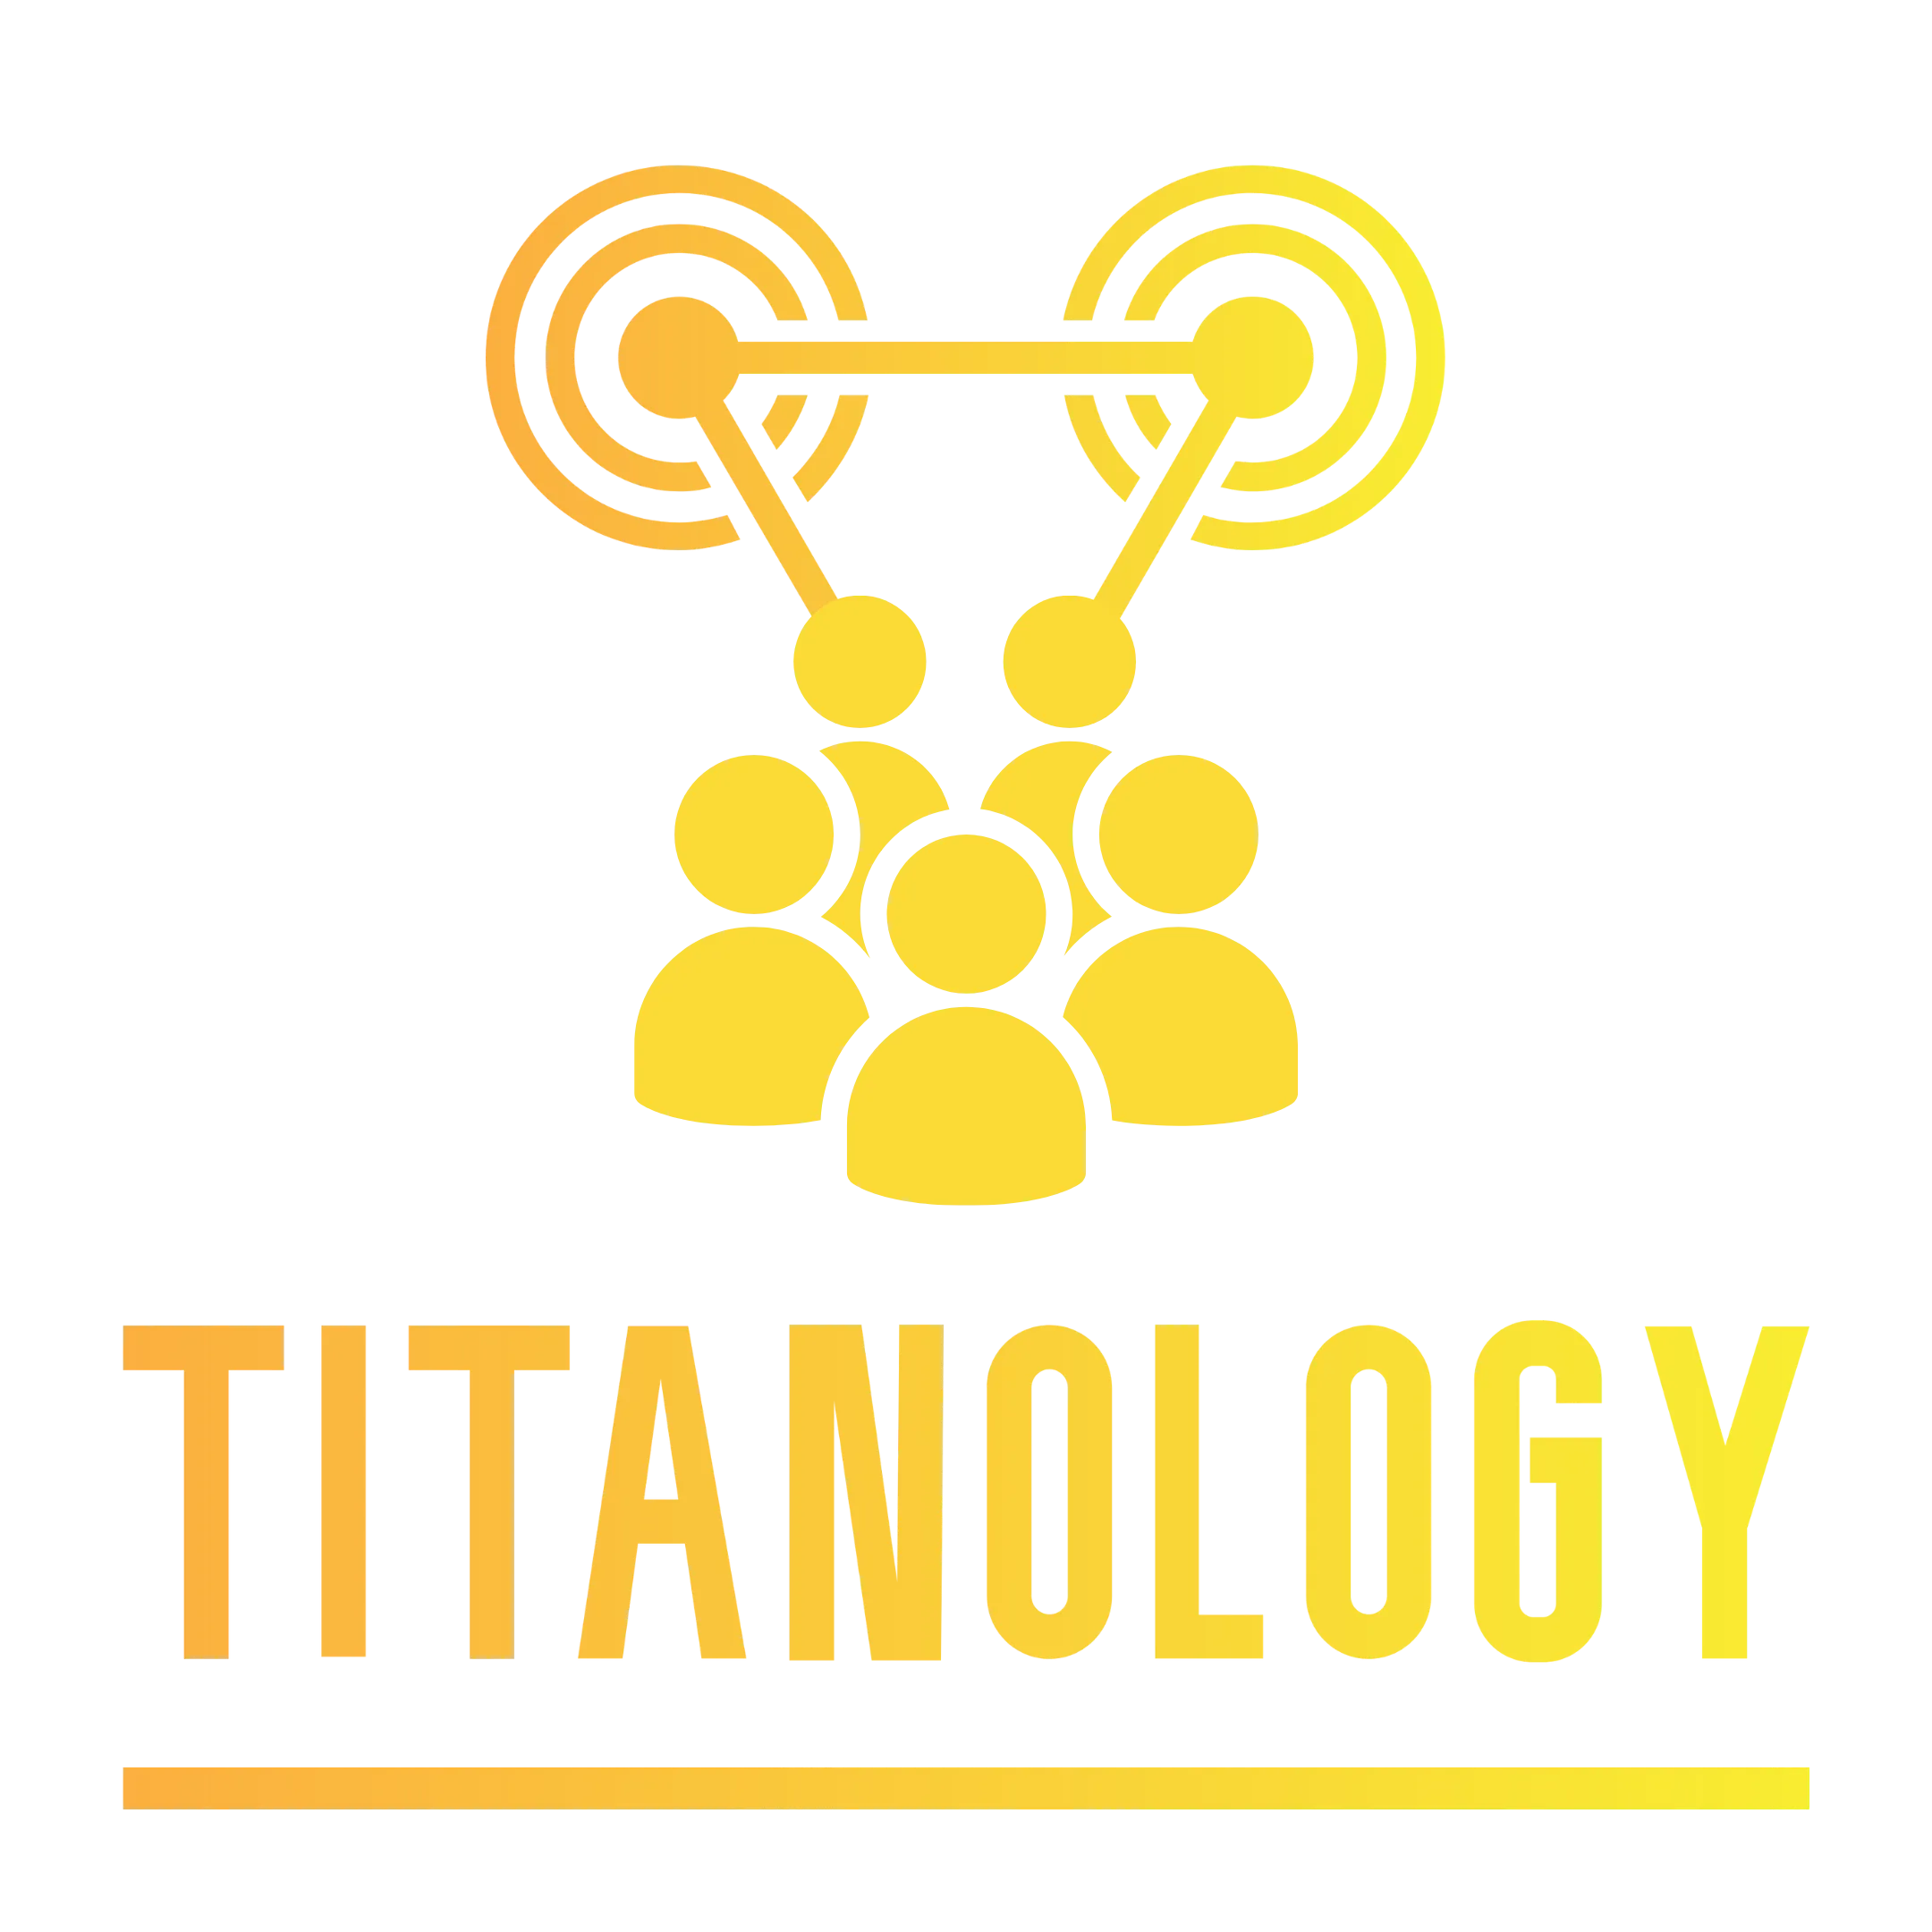 titanology logo with a group of people icon